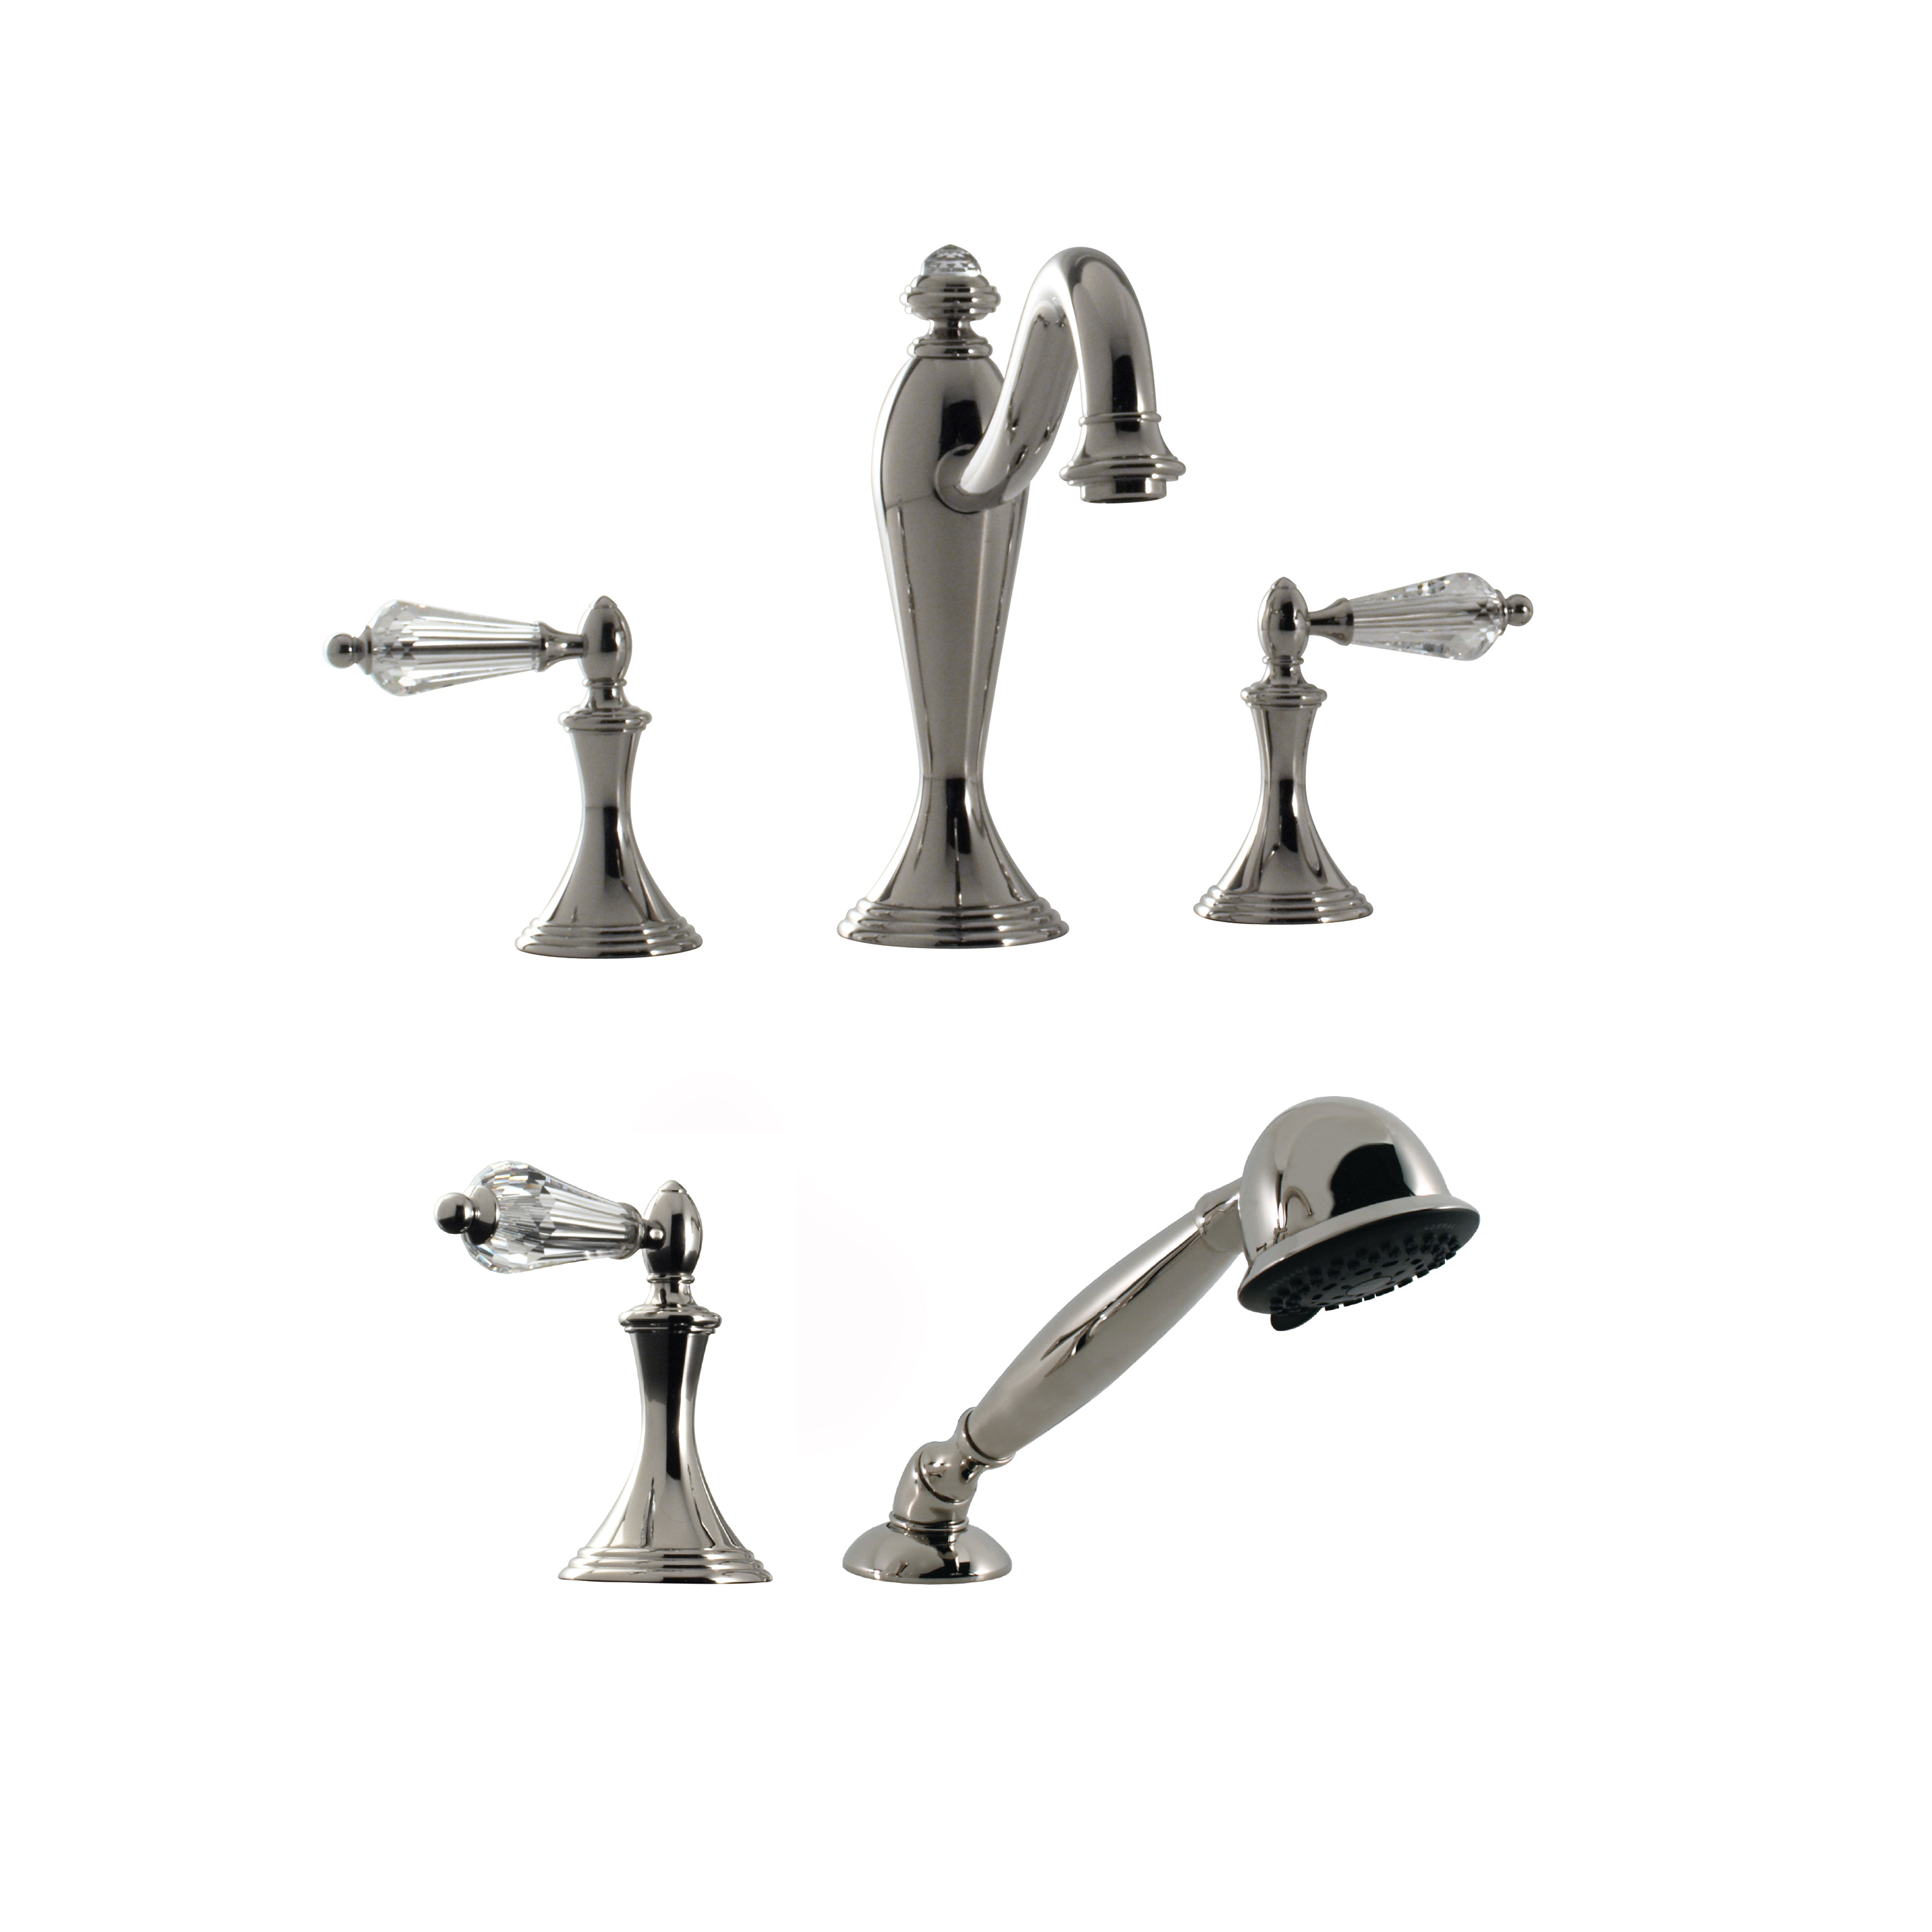 Santec 2555YC10 Lear Crystal Roman Tub Filler Set with Hand Held Shower with "YC" Handles - Polished Chrome